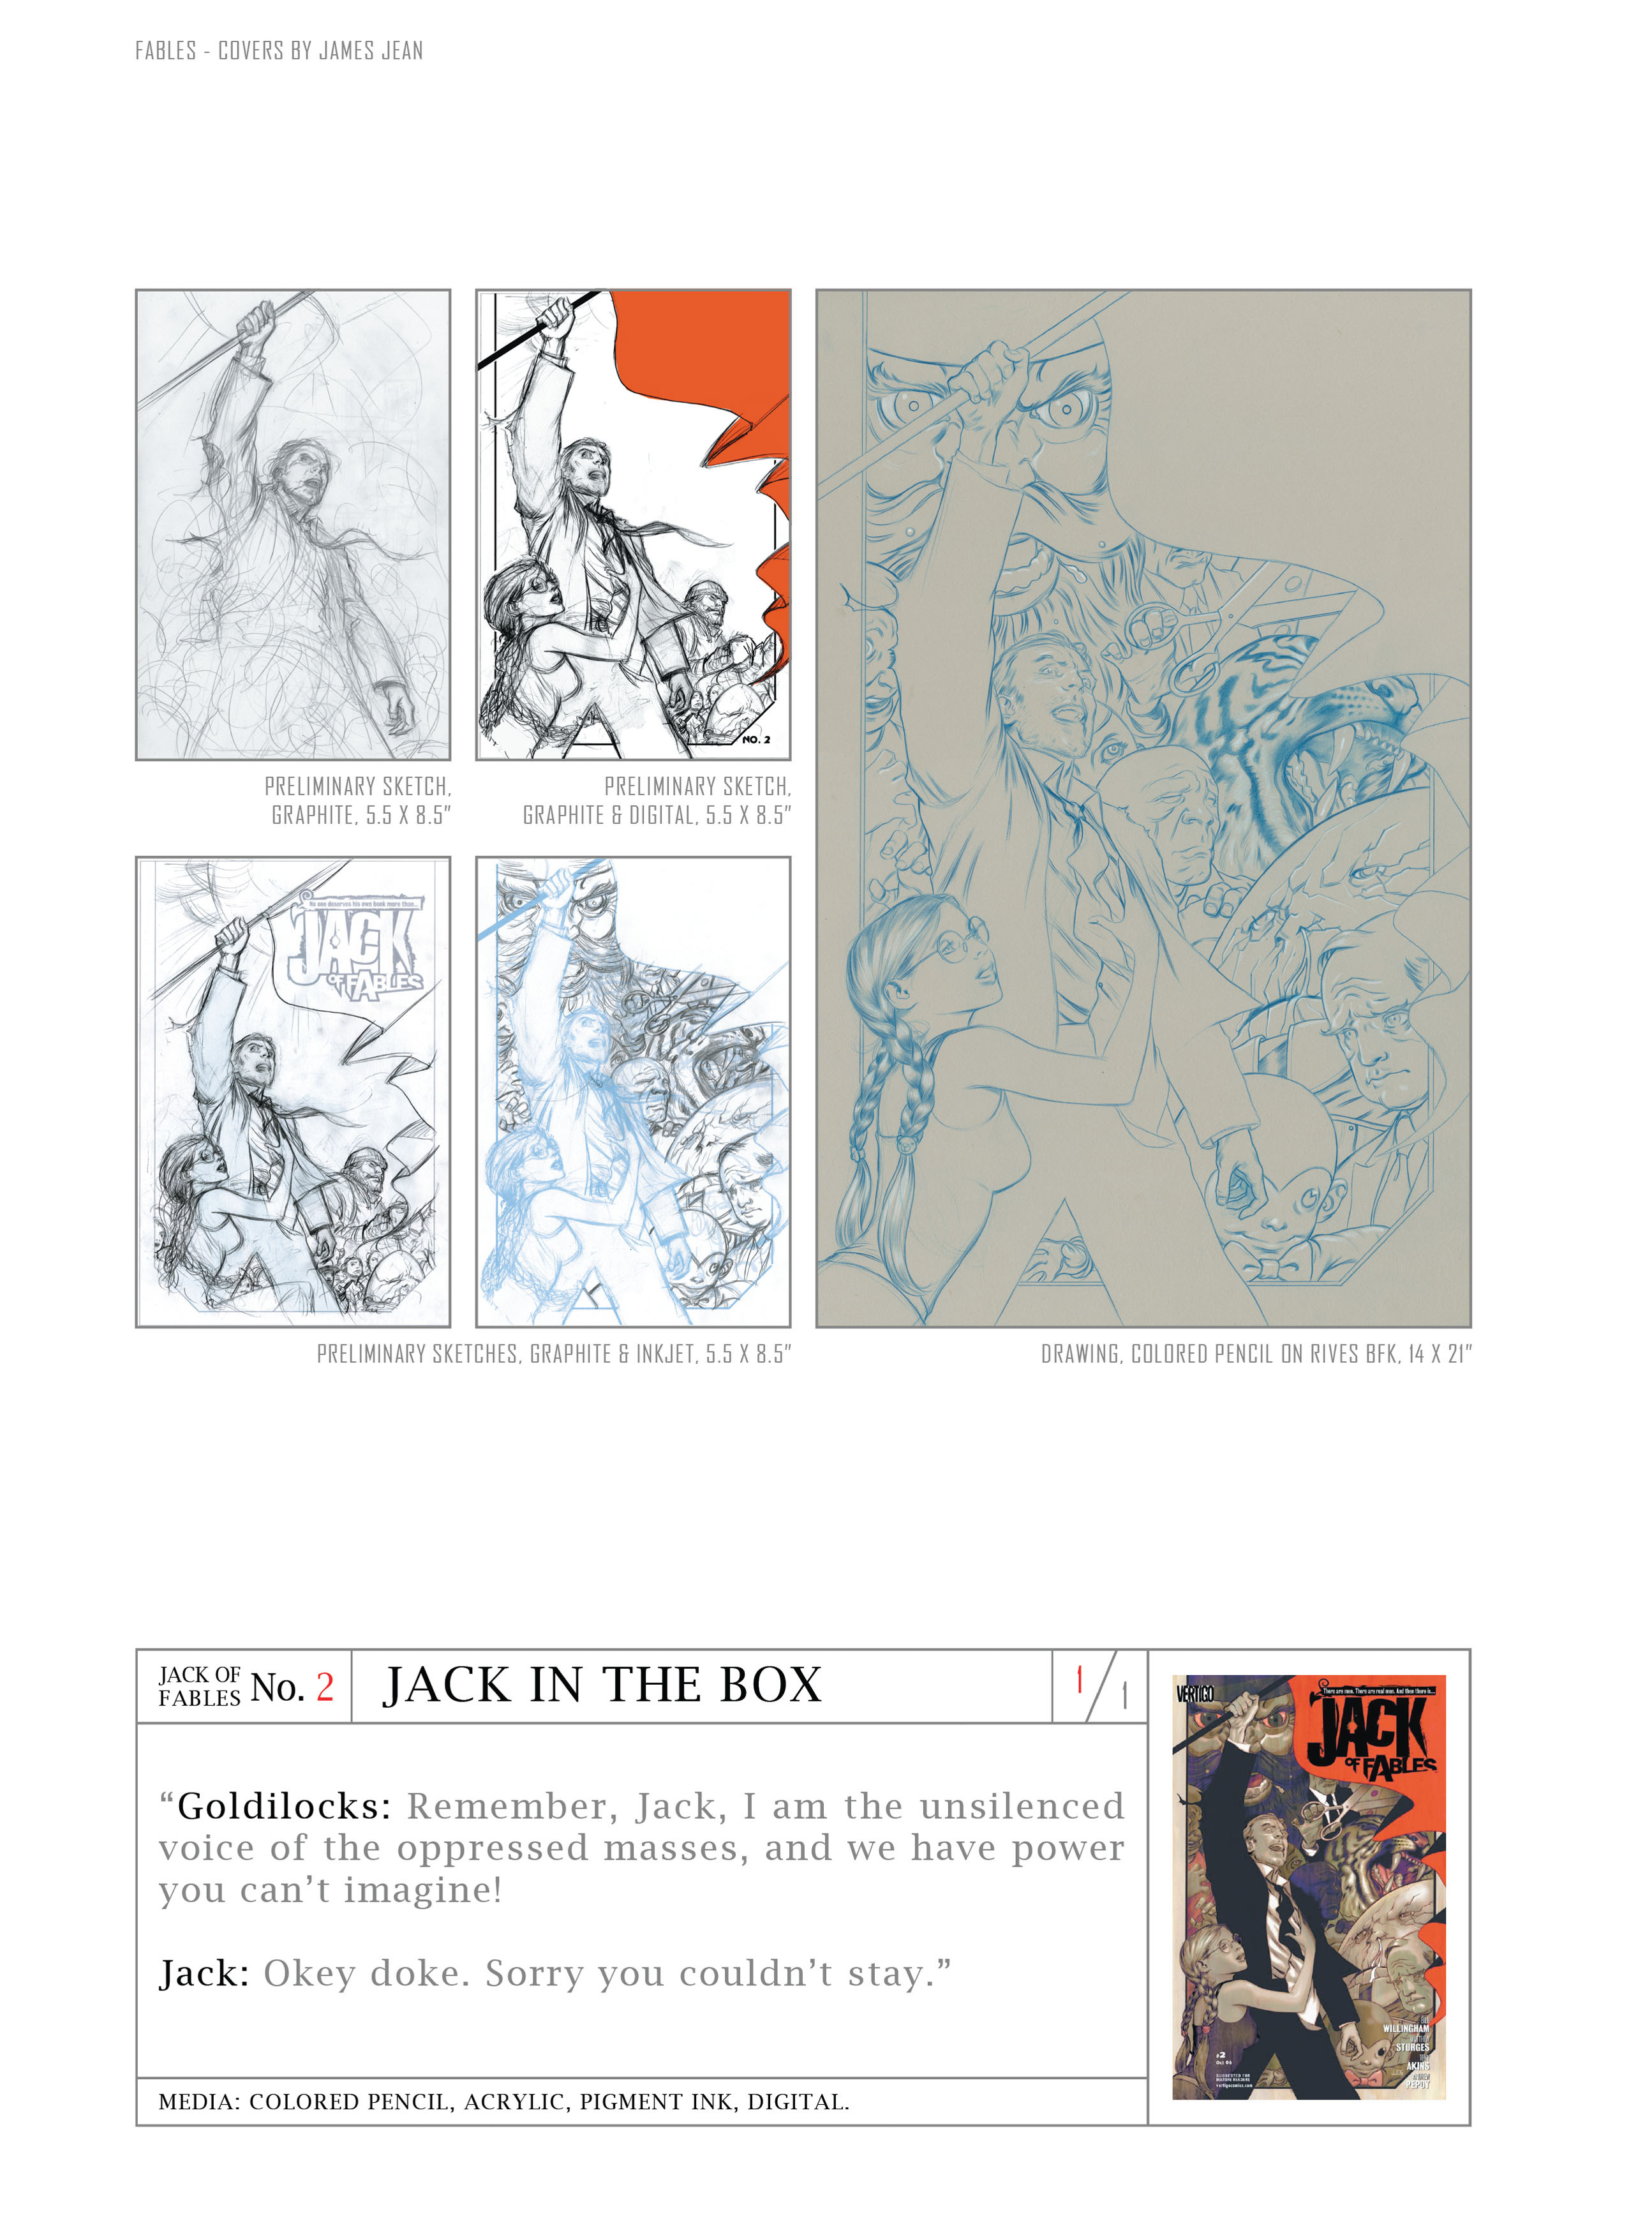 Read online Fables: Covers by James Jean comic -  Issue # TPB (Part 3) - 5